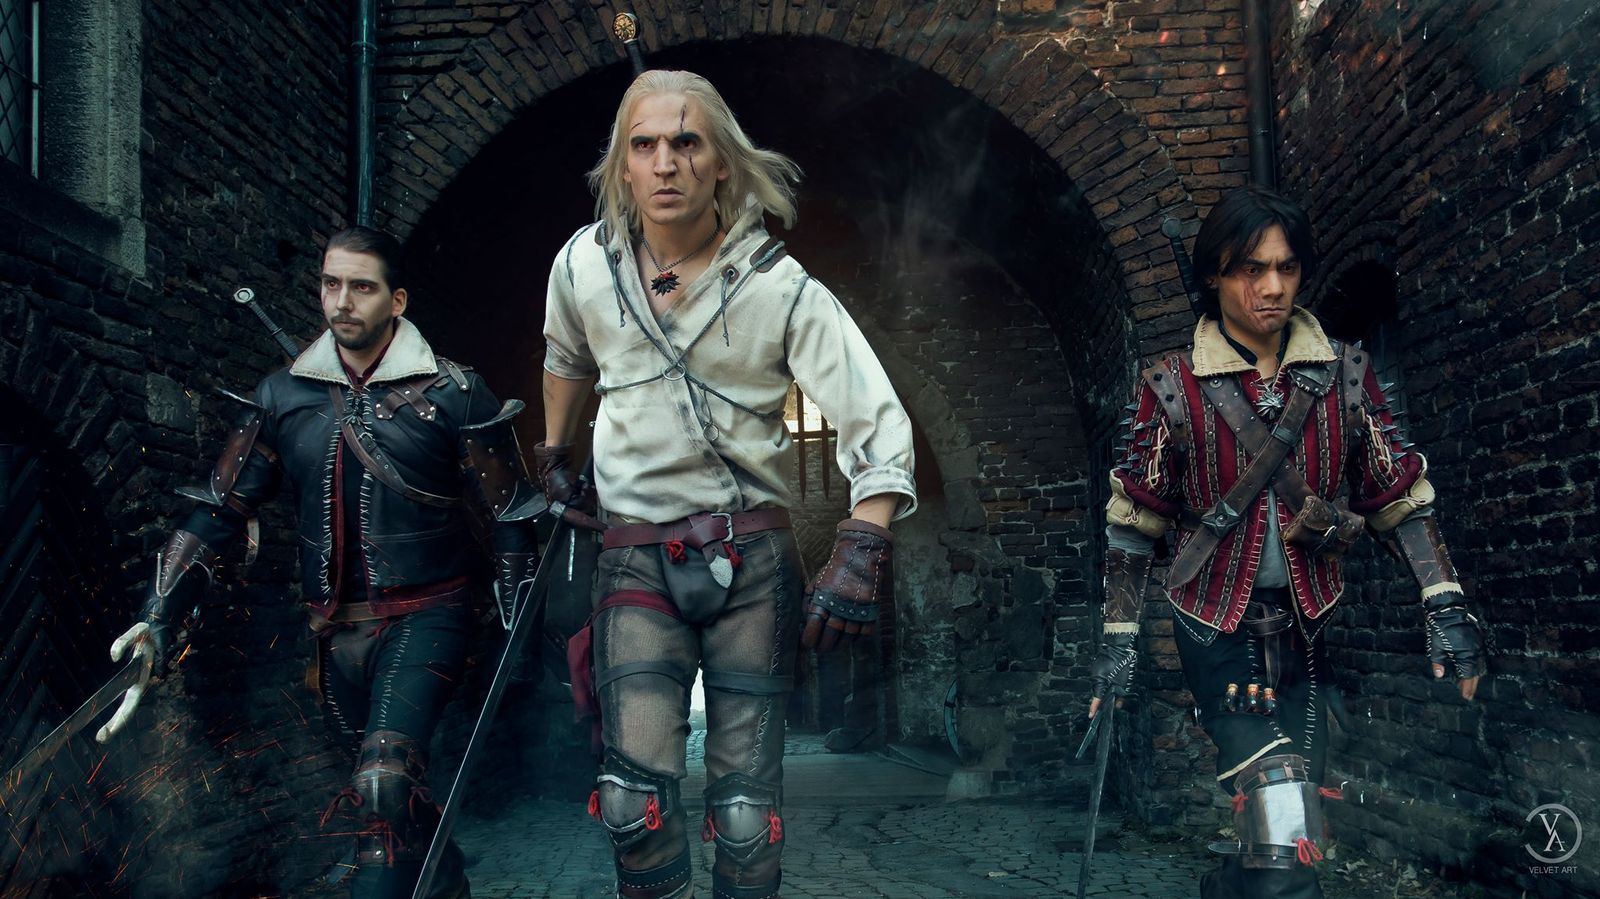 Wolf-pack /Lambert, Geralt, Eskel Cosplay - Witcher, The Witcher 3: Wild Hunt, Cosplay, Images, Geralt of Rivia, Kaer Morhen, The photo, Games